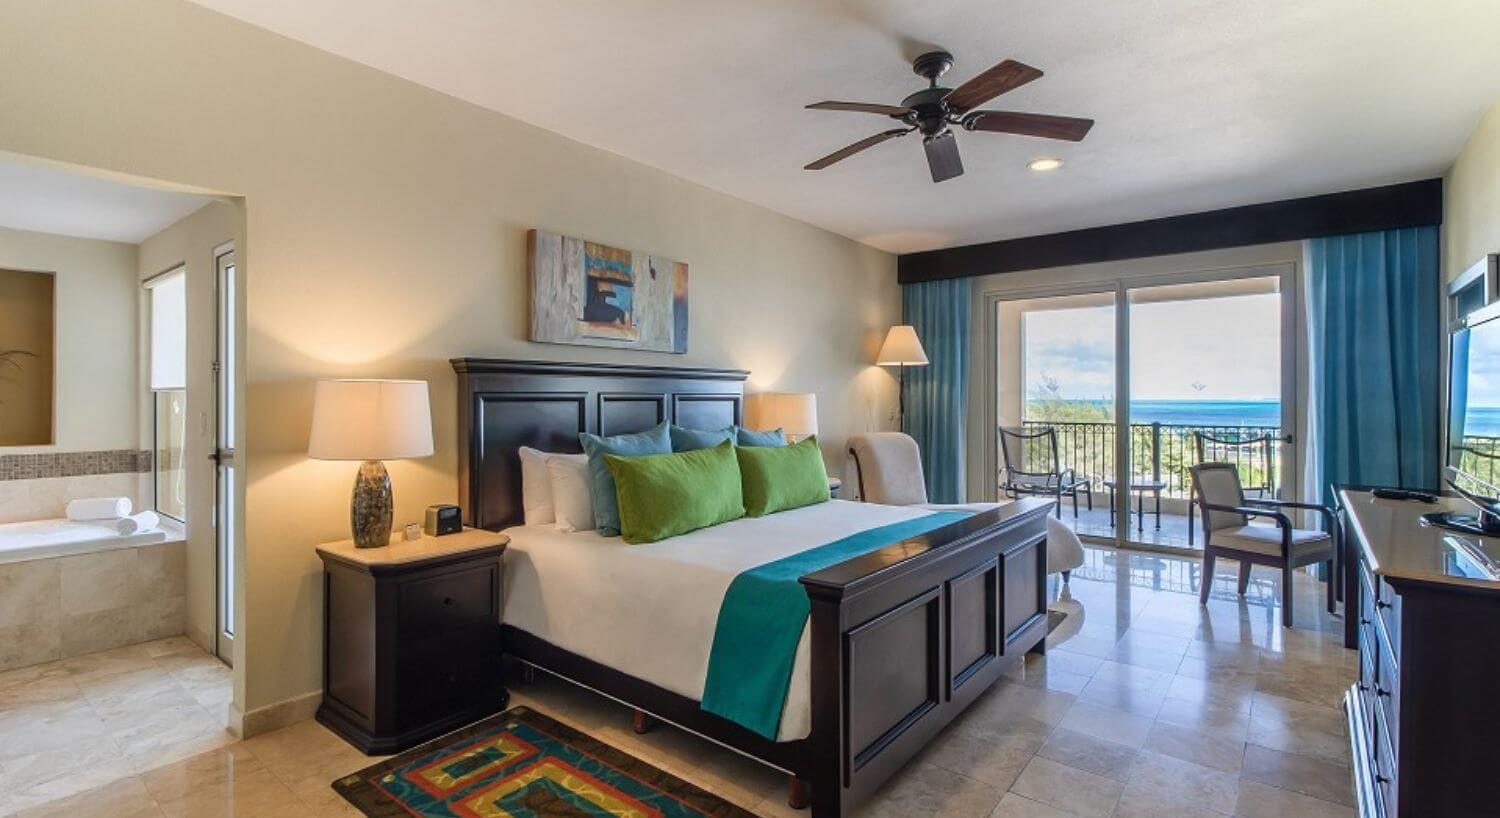 A bedroom with a King bed with dark wood headboard and footboard, white, green and blue bedding, matching nightstands and lamps on either side of the bed, a dresser with TV on the opposite wall, a desk and chair, sliding doors leading out to a balcony with patio furniture and ocean views, and a bathroom next to the bed with a jetted tub.